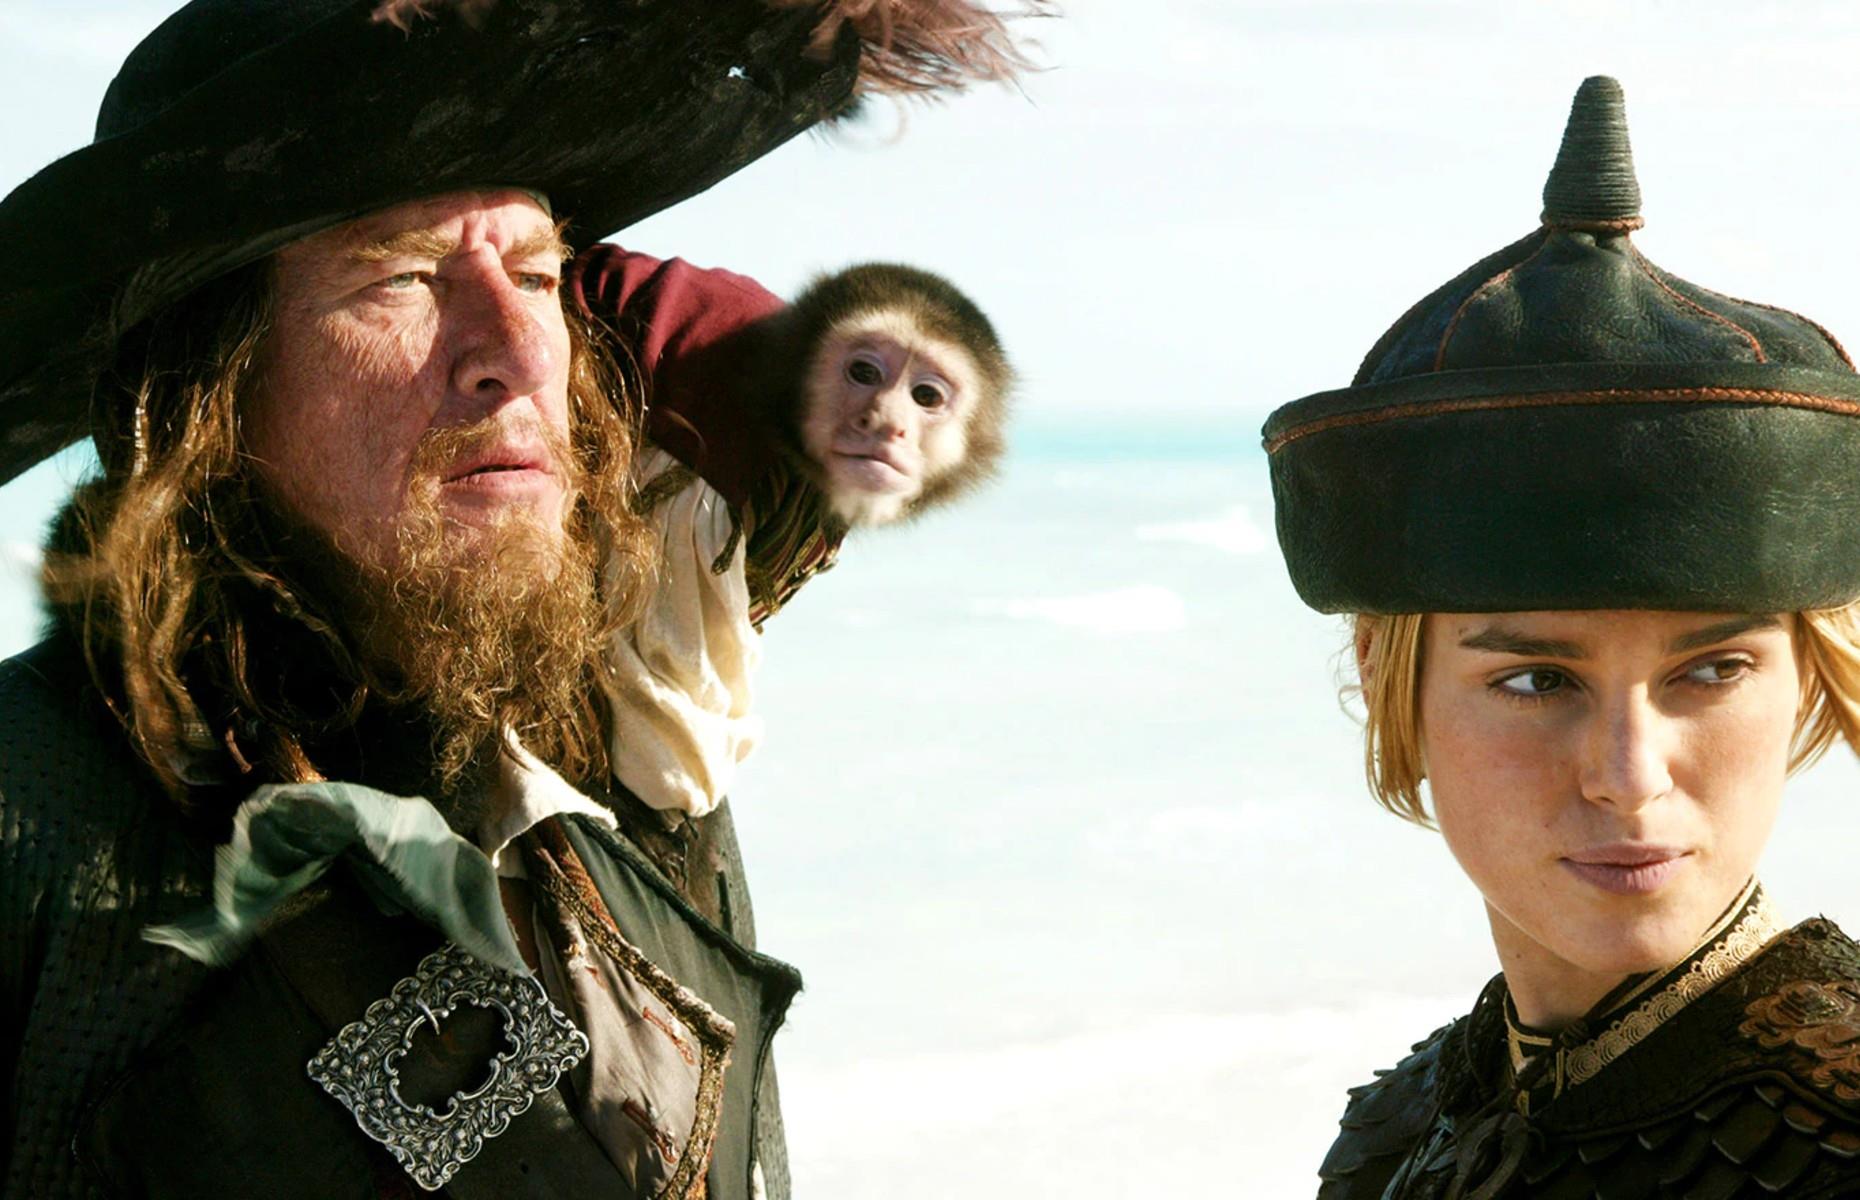 Joint 4th. Pirates of the Caribbean: At World’s End (2007) – cost: $300 million (£213m); profit: $391 million (£468m)